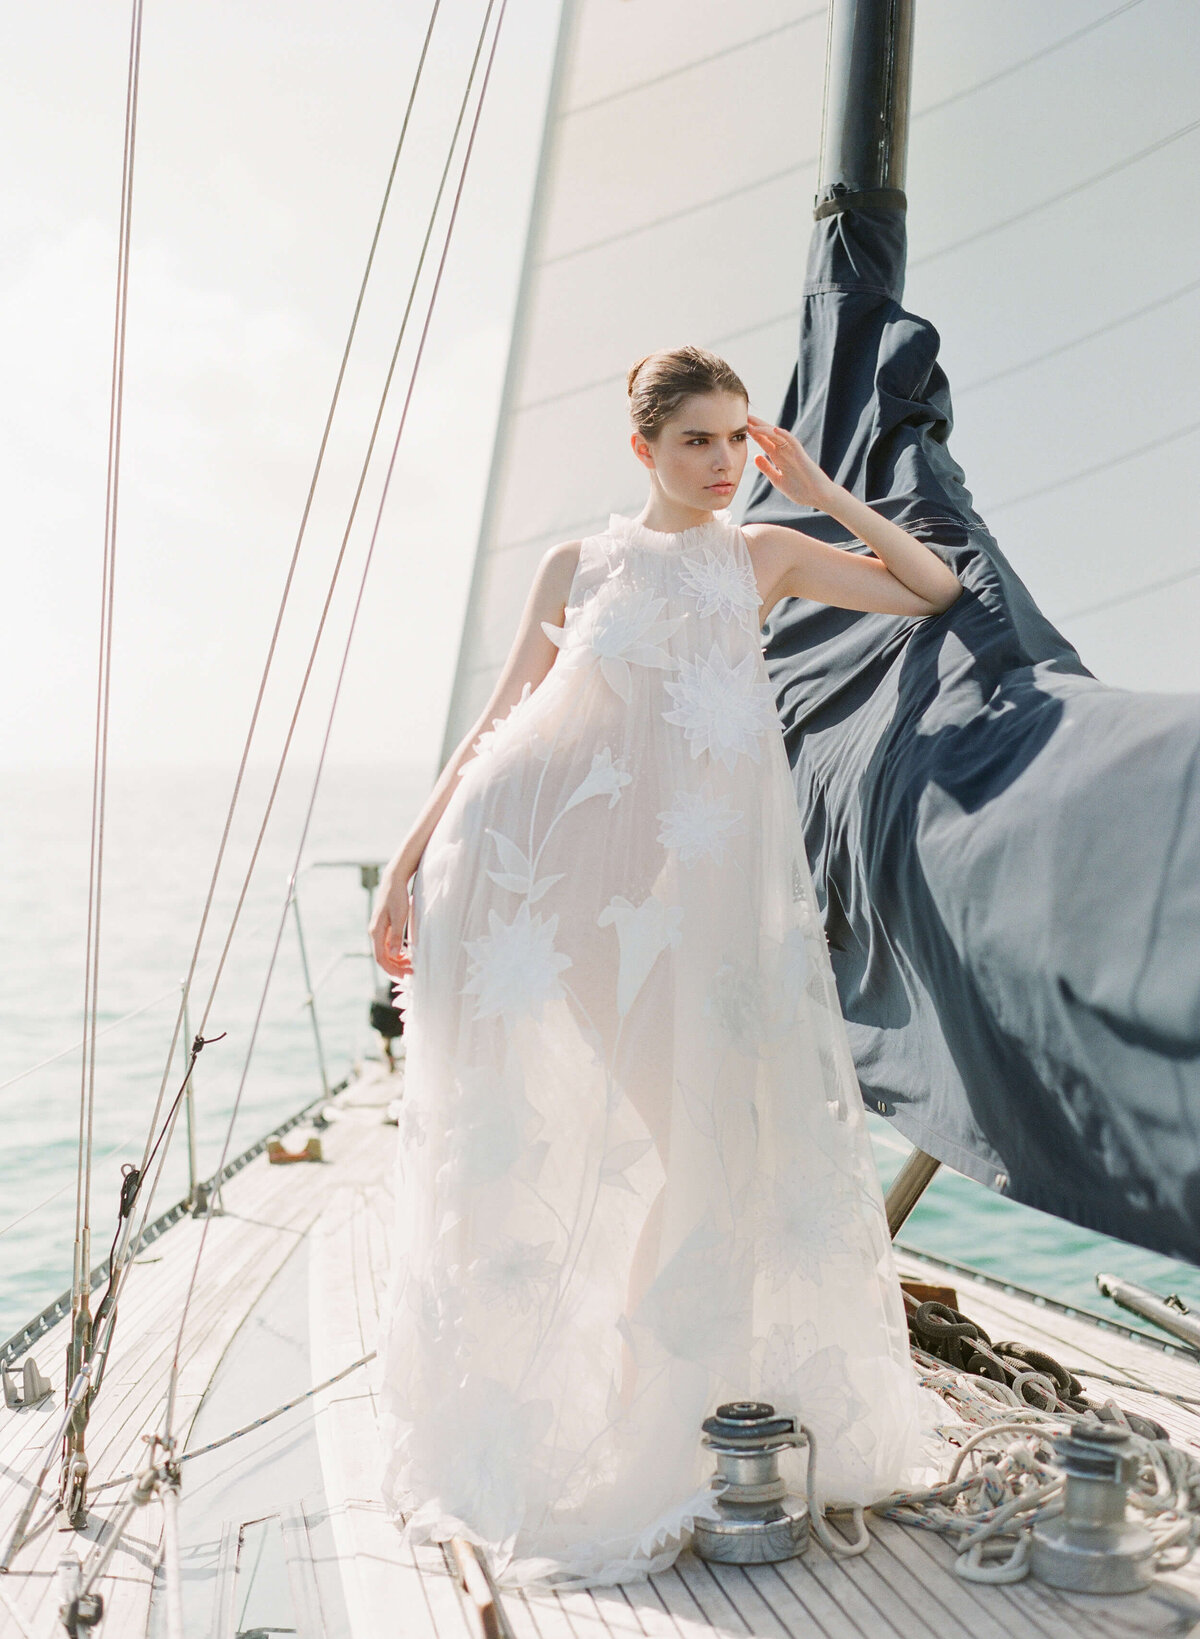 18-KT-Merry-bridal-couture-editorial-viktor-rolf-mariage